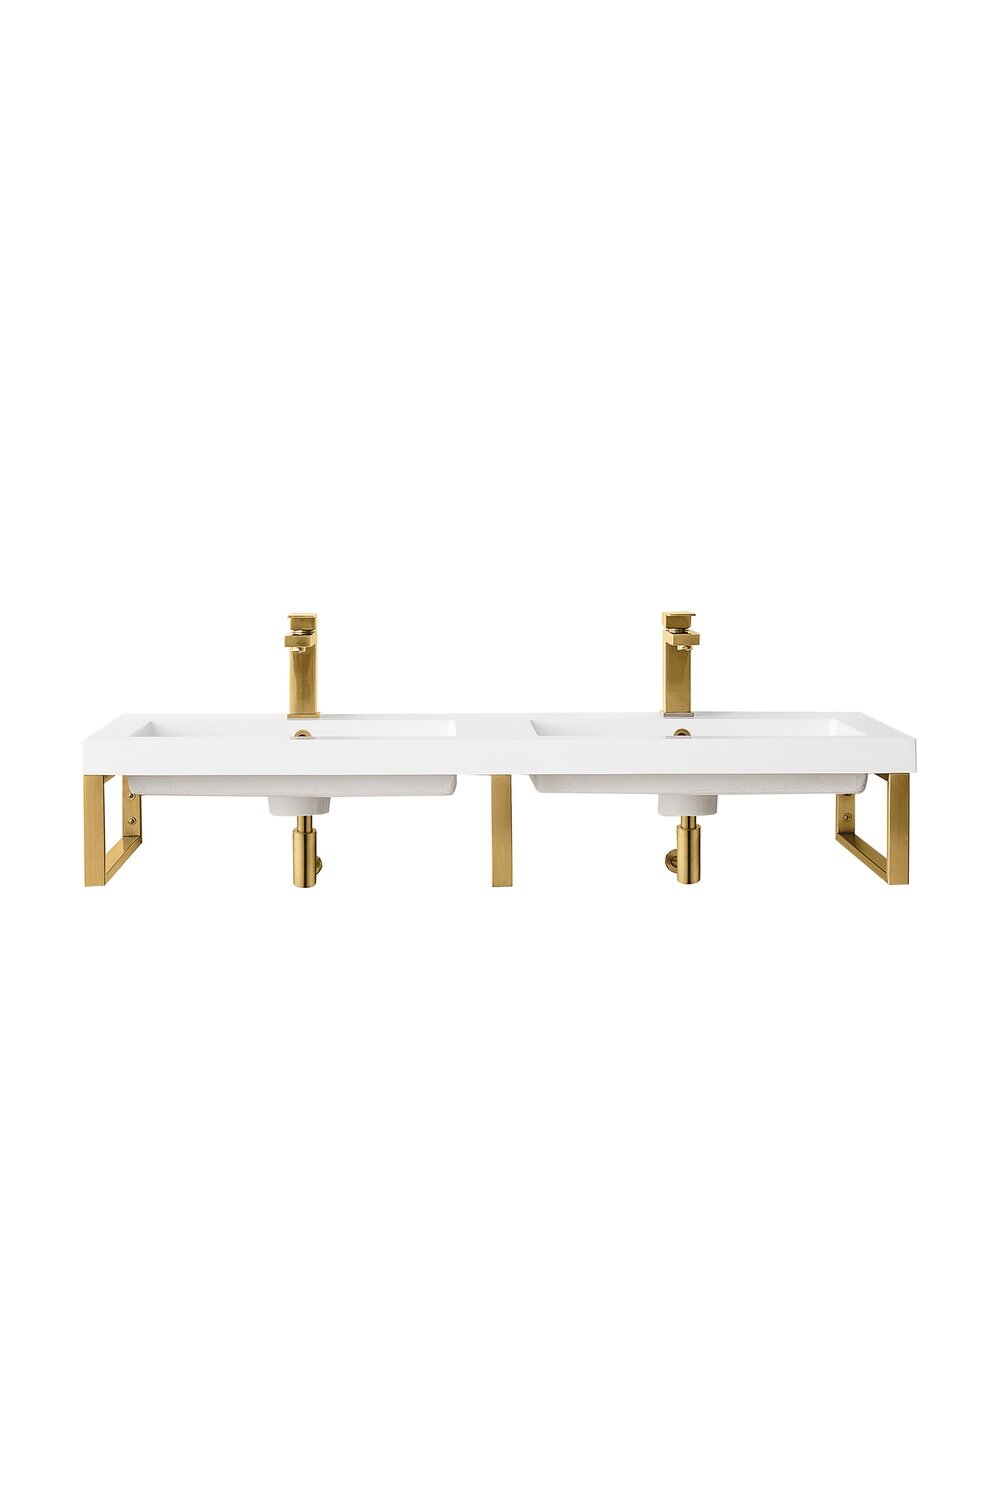 JAMES MARTIN - Three Boston 18&quot; Wall Brackets, Radiant Gold w/ 47&quot; White Glossy Composite Stone Top 055BK18RGD47WG2